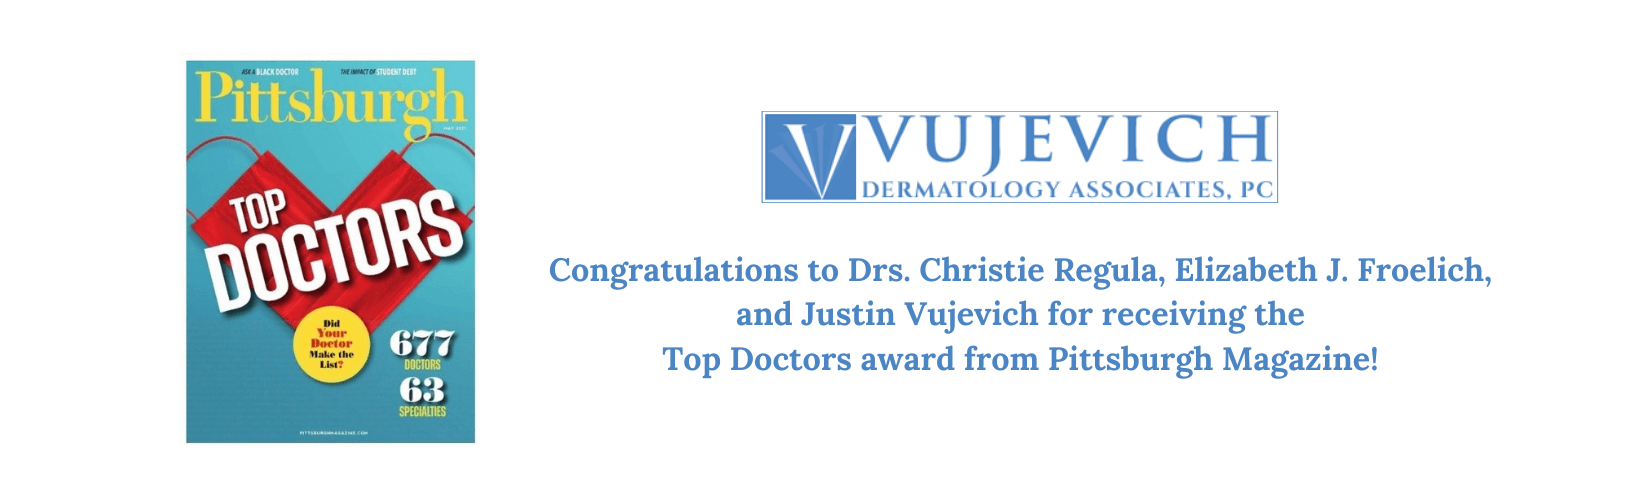 Top Doctors from Pittsburgh Magazine dermatologists at Vujevich Dermatology